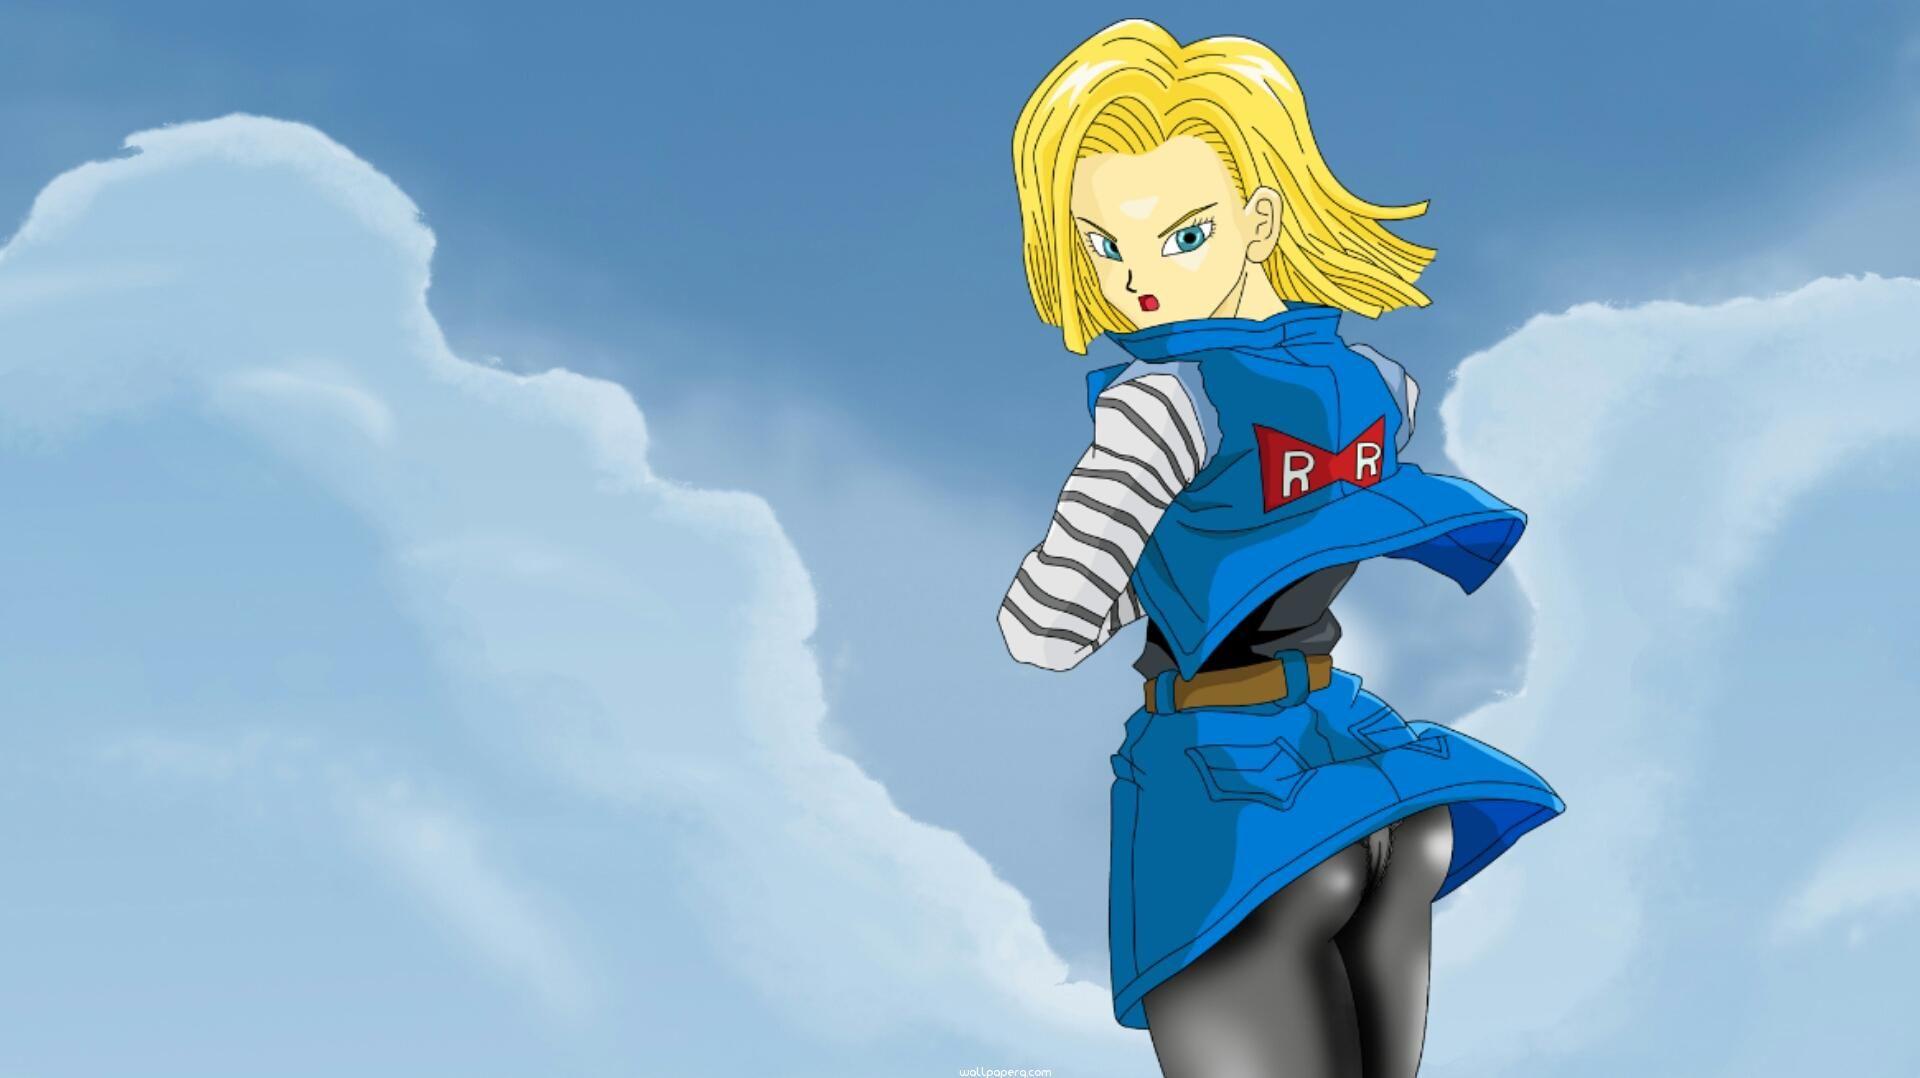 Download Android 18 Wallpaper Ball Z Wallpaper Mobile Version